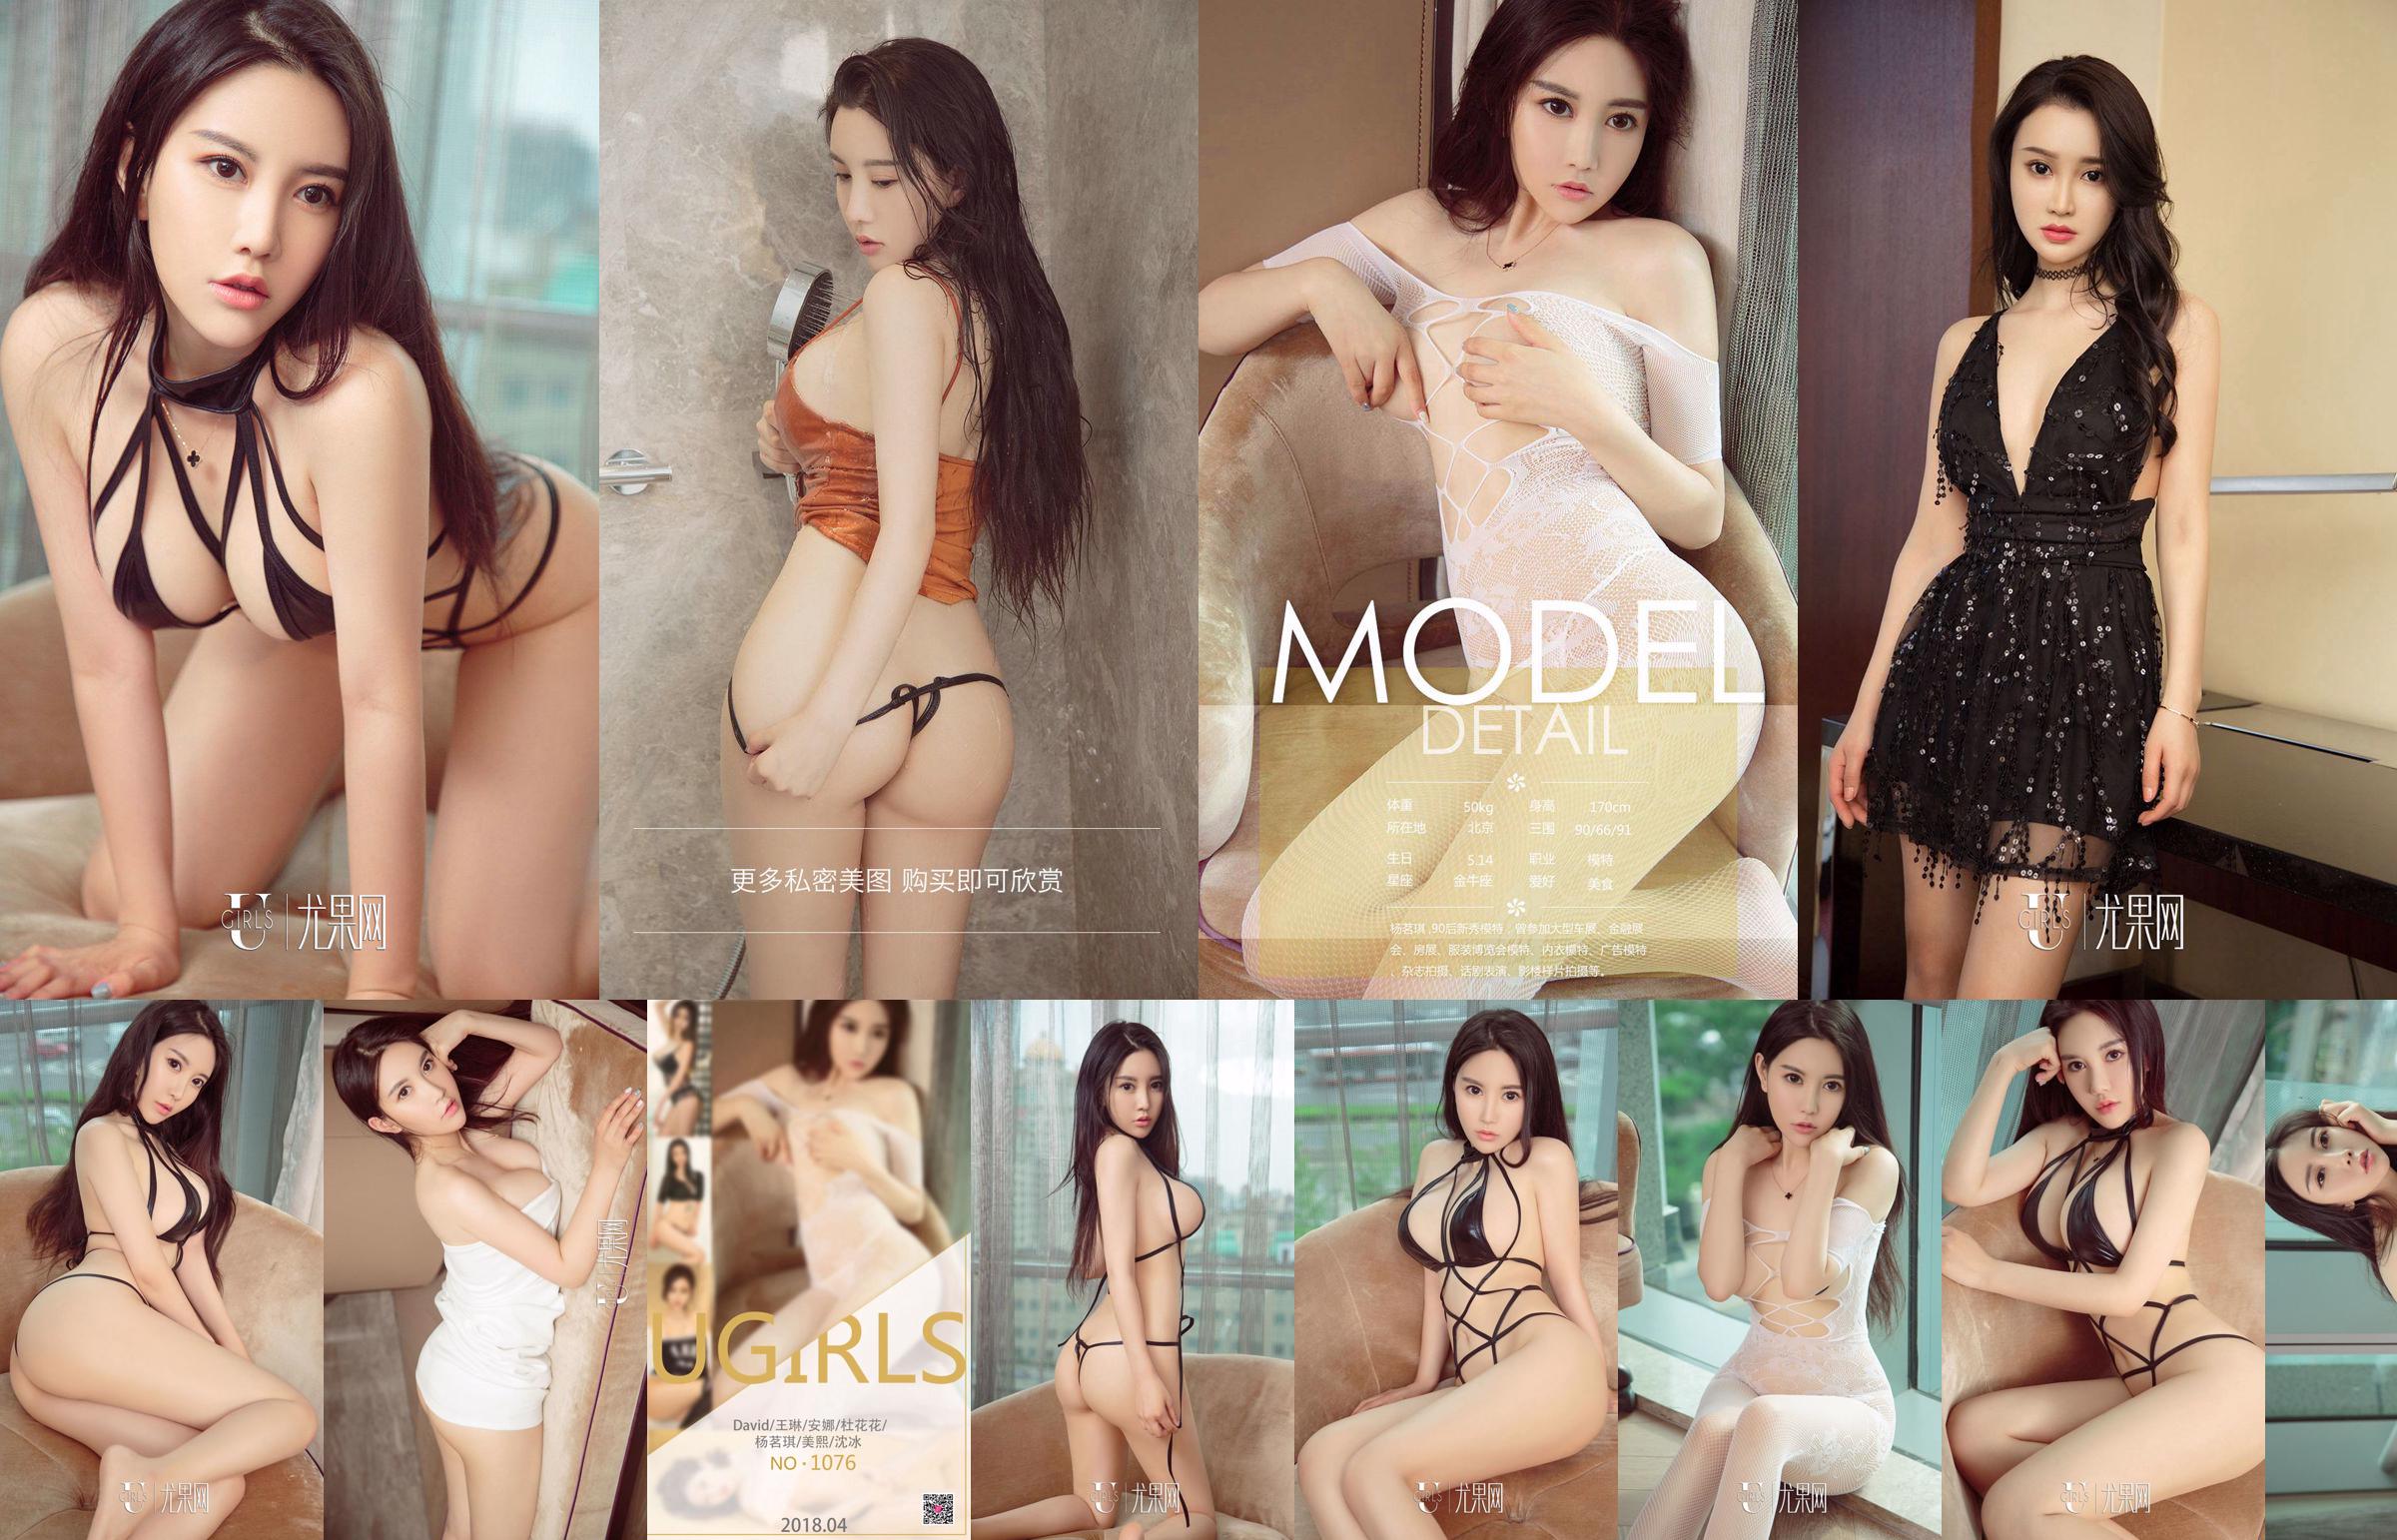 Yang Mingqi "Excessive Sexy" [Youguoquan Loves Stunners] No.1056 No.bc1a39 Page 3